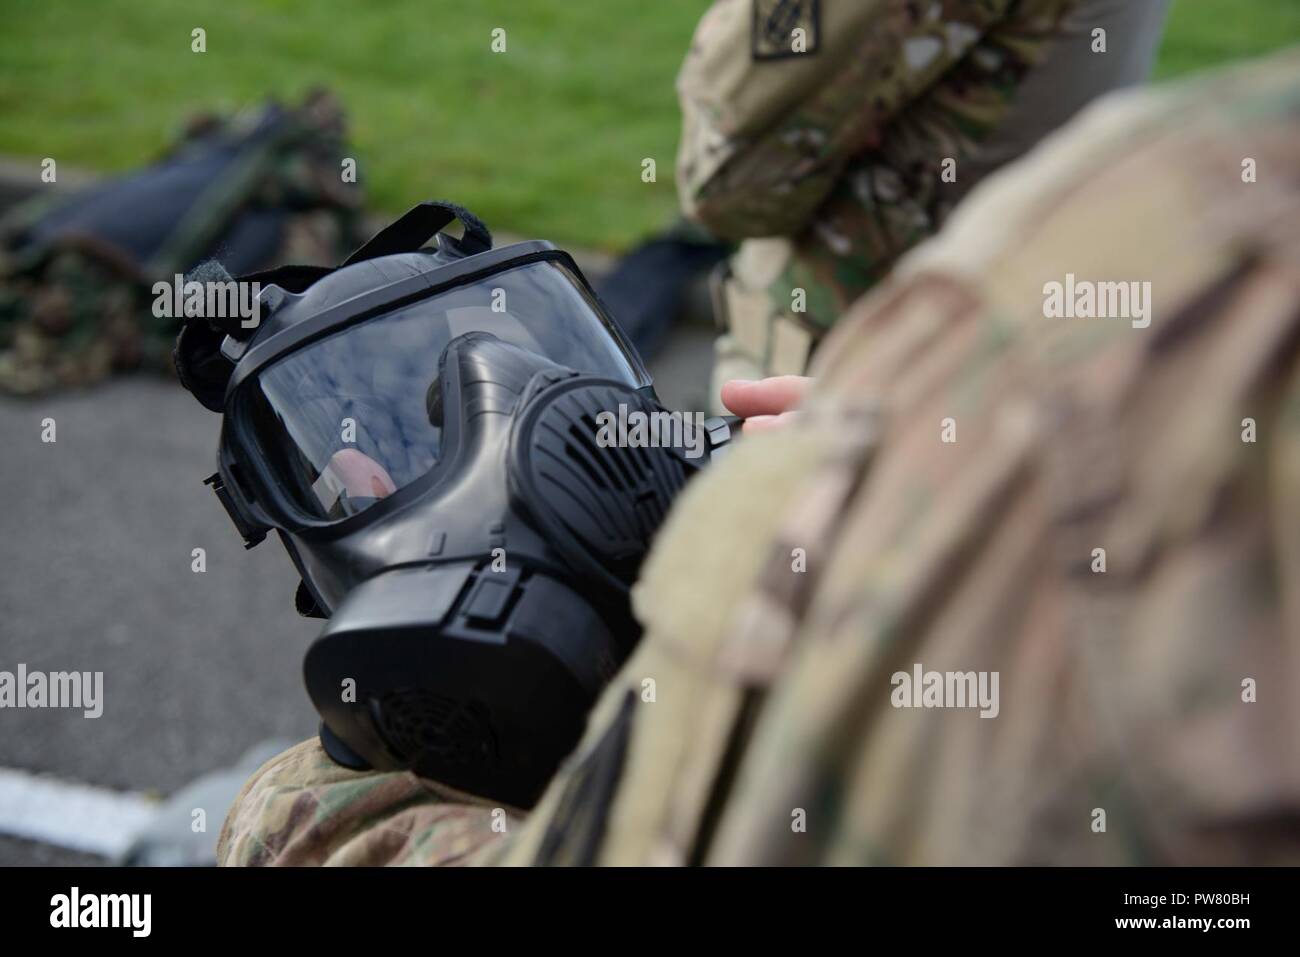 A U.S. Soldier with 39th Strategic Signal Battalion checks an M50 joint service general purpose mask for Commander's Prime Time Training: after a 12-Mile ruck march, Soldiers go through the Chemical Biological Radiological Nuclear (CBRN) room, and practice shooting on the Engagement Skills Trainer 2 with protective gear, on Chièvres Air Base, Belgium, Aug. 20, 2017. Stock Photo